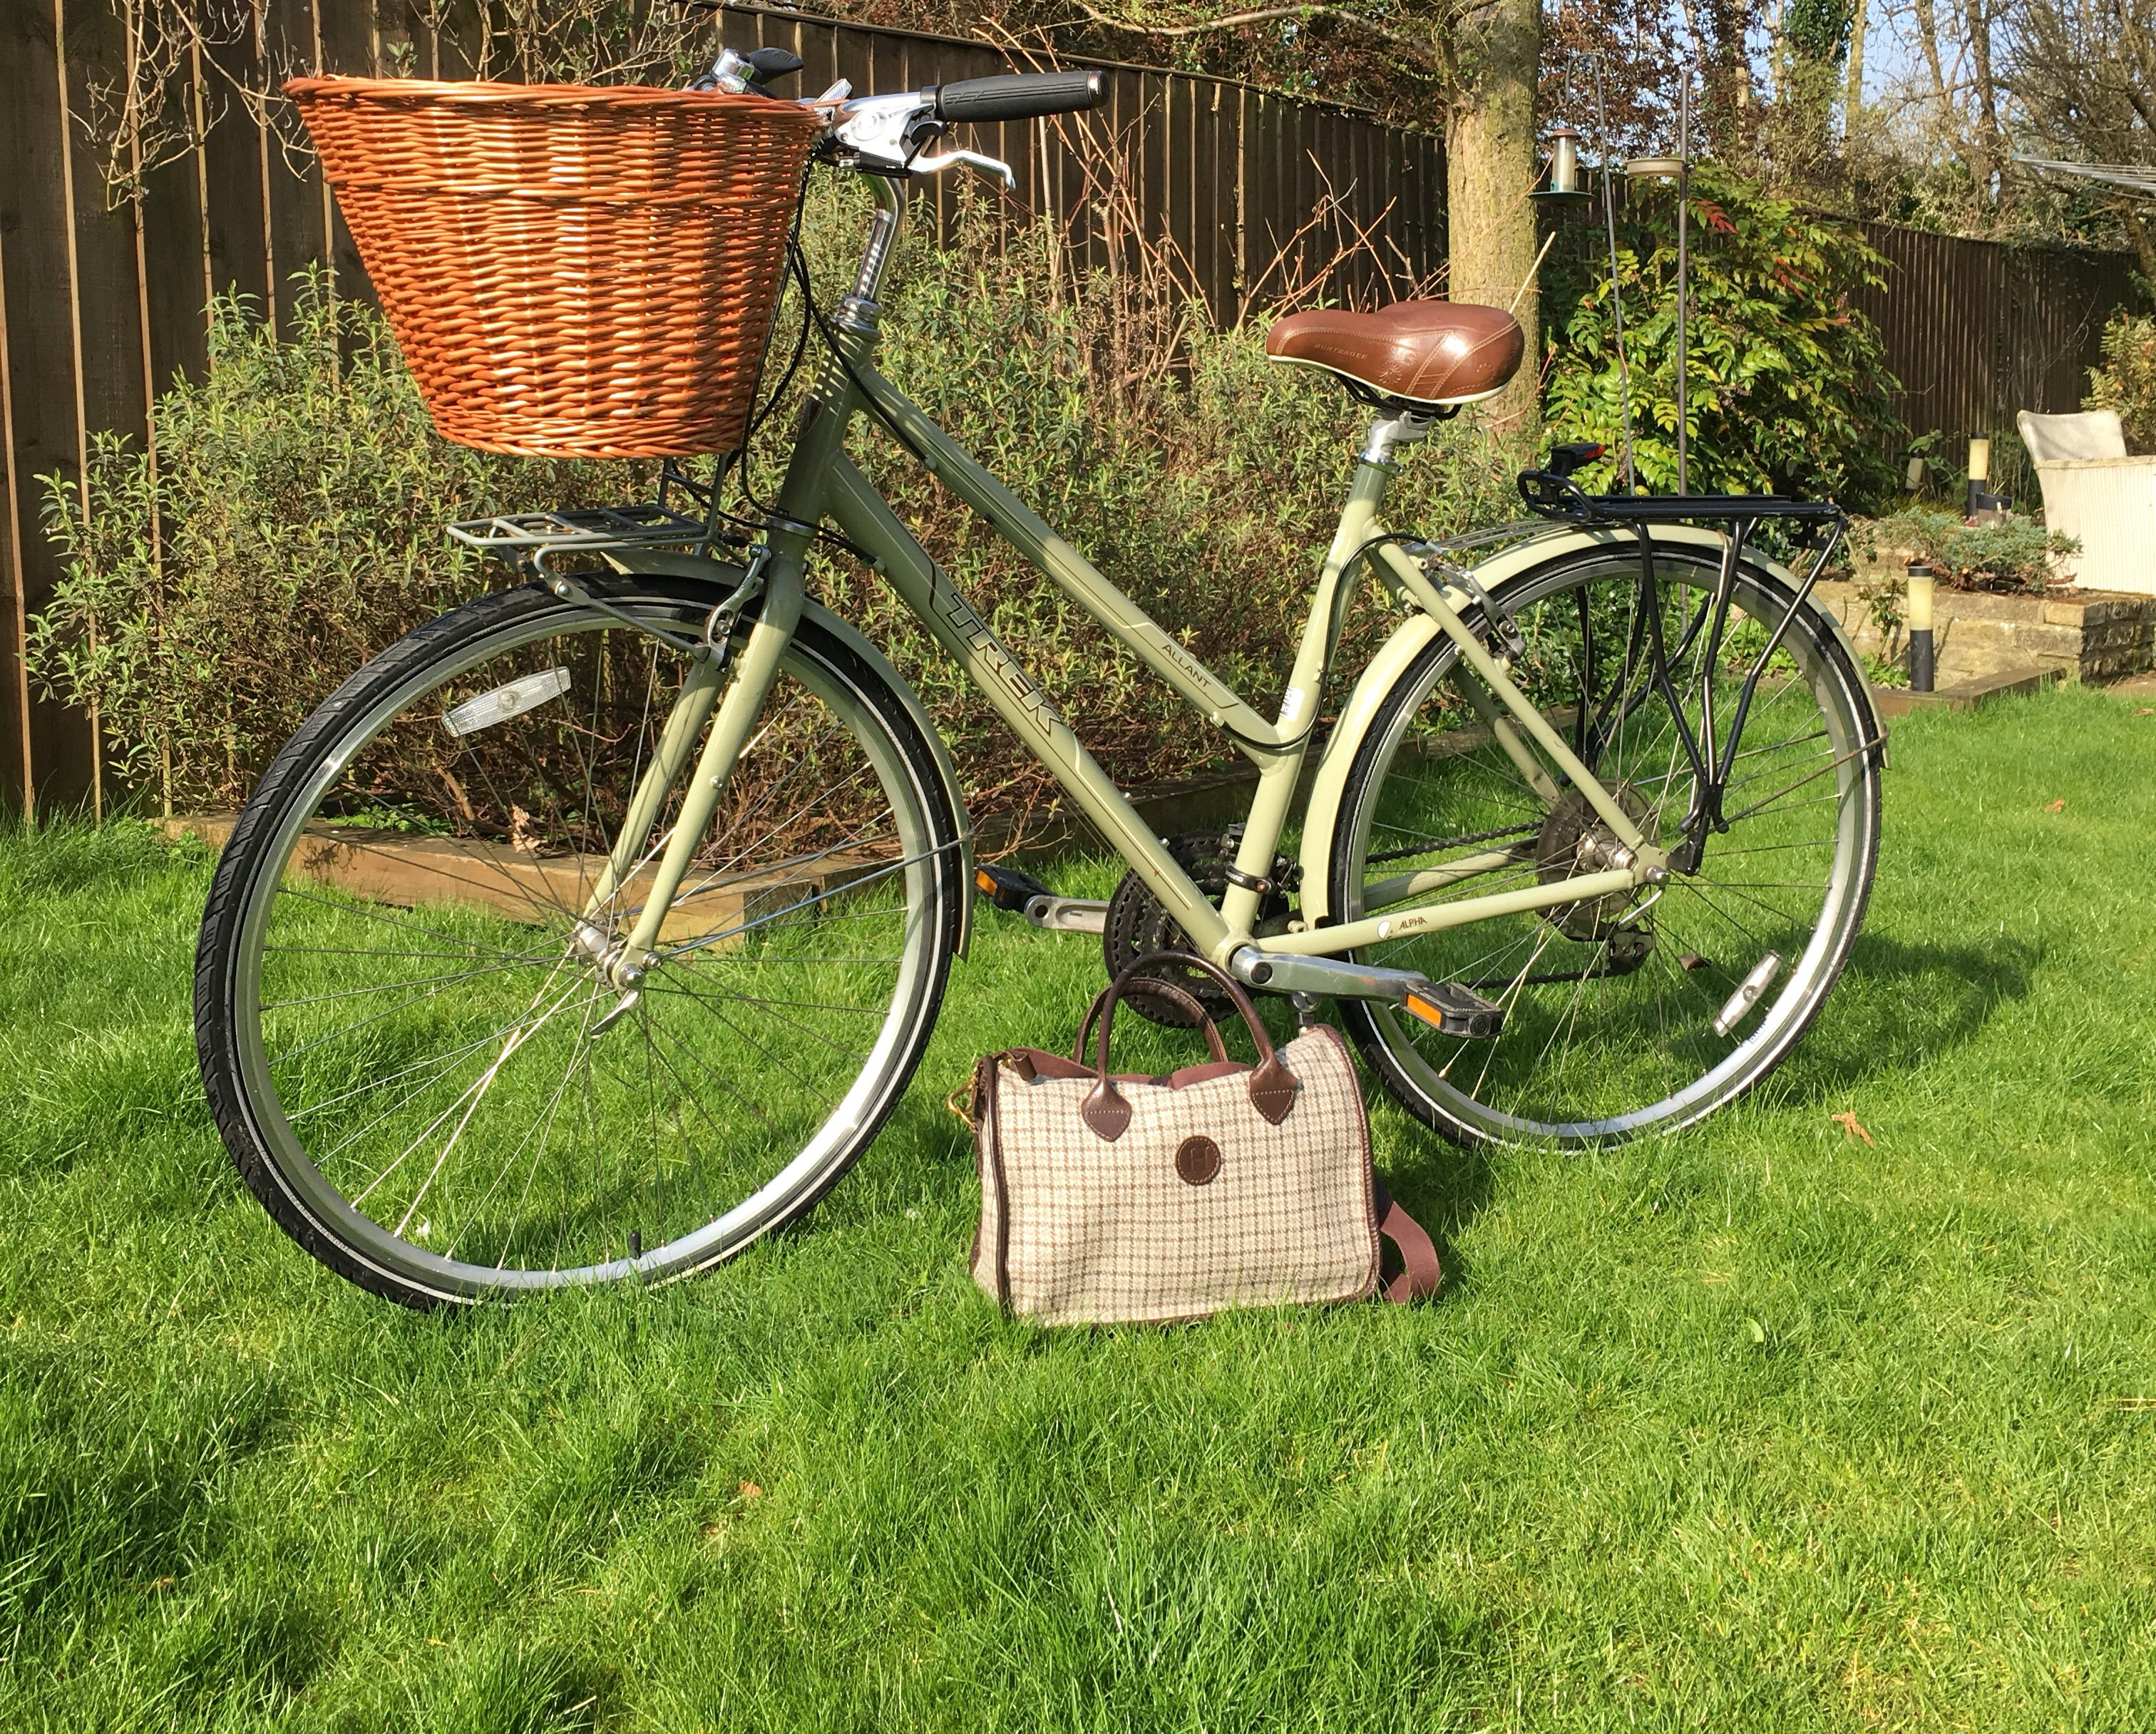 The Educated Traveller's sturdy Herdwick Hand Bag - going strong!